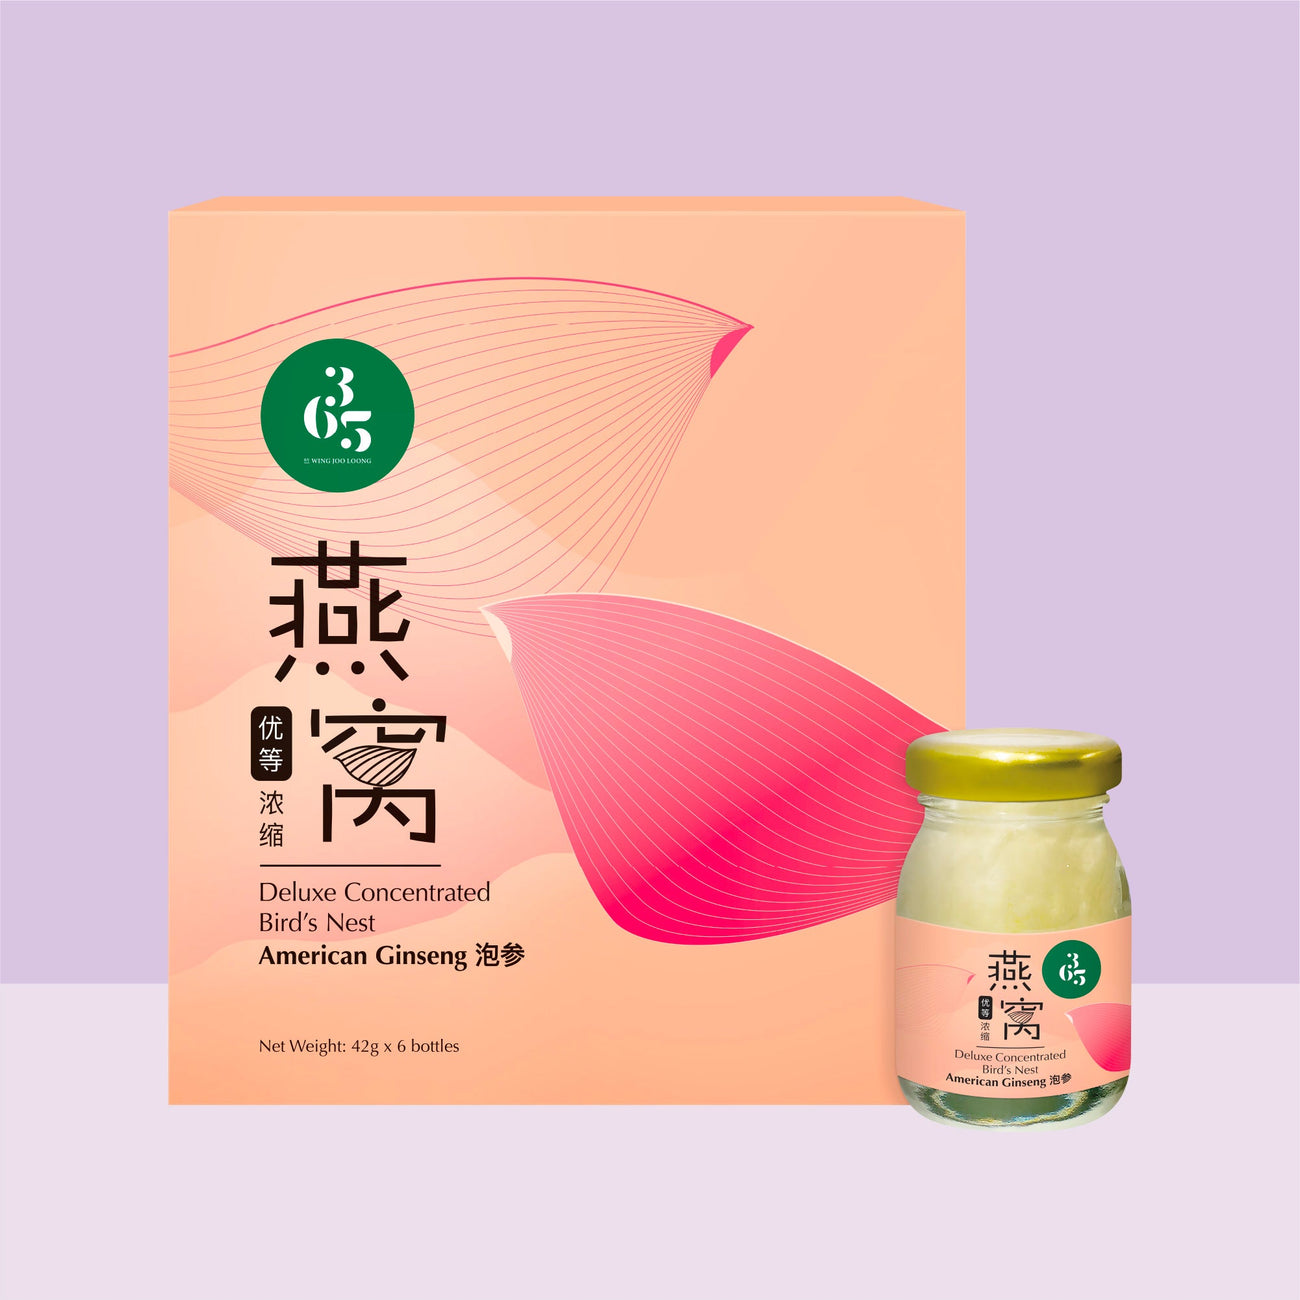 365 by Wing Joo Loong Deluxe Concentrated Bird's Nest with American Ginseng